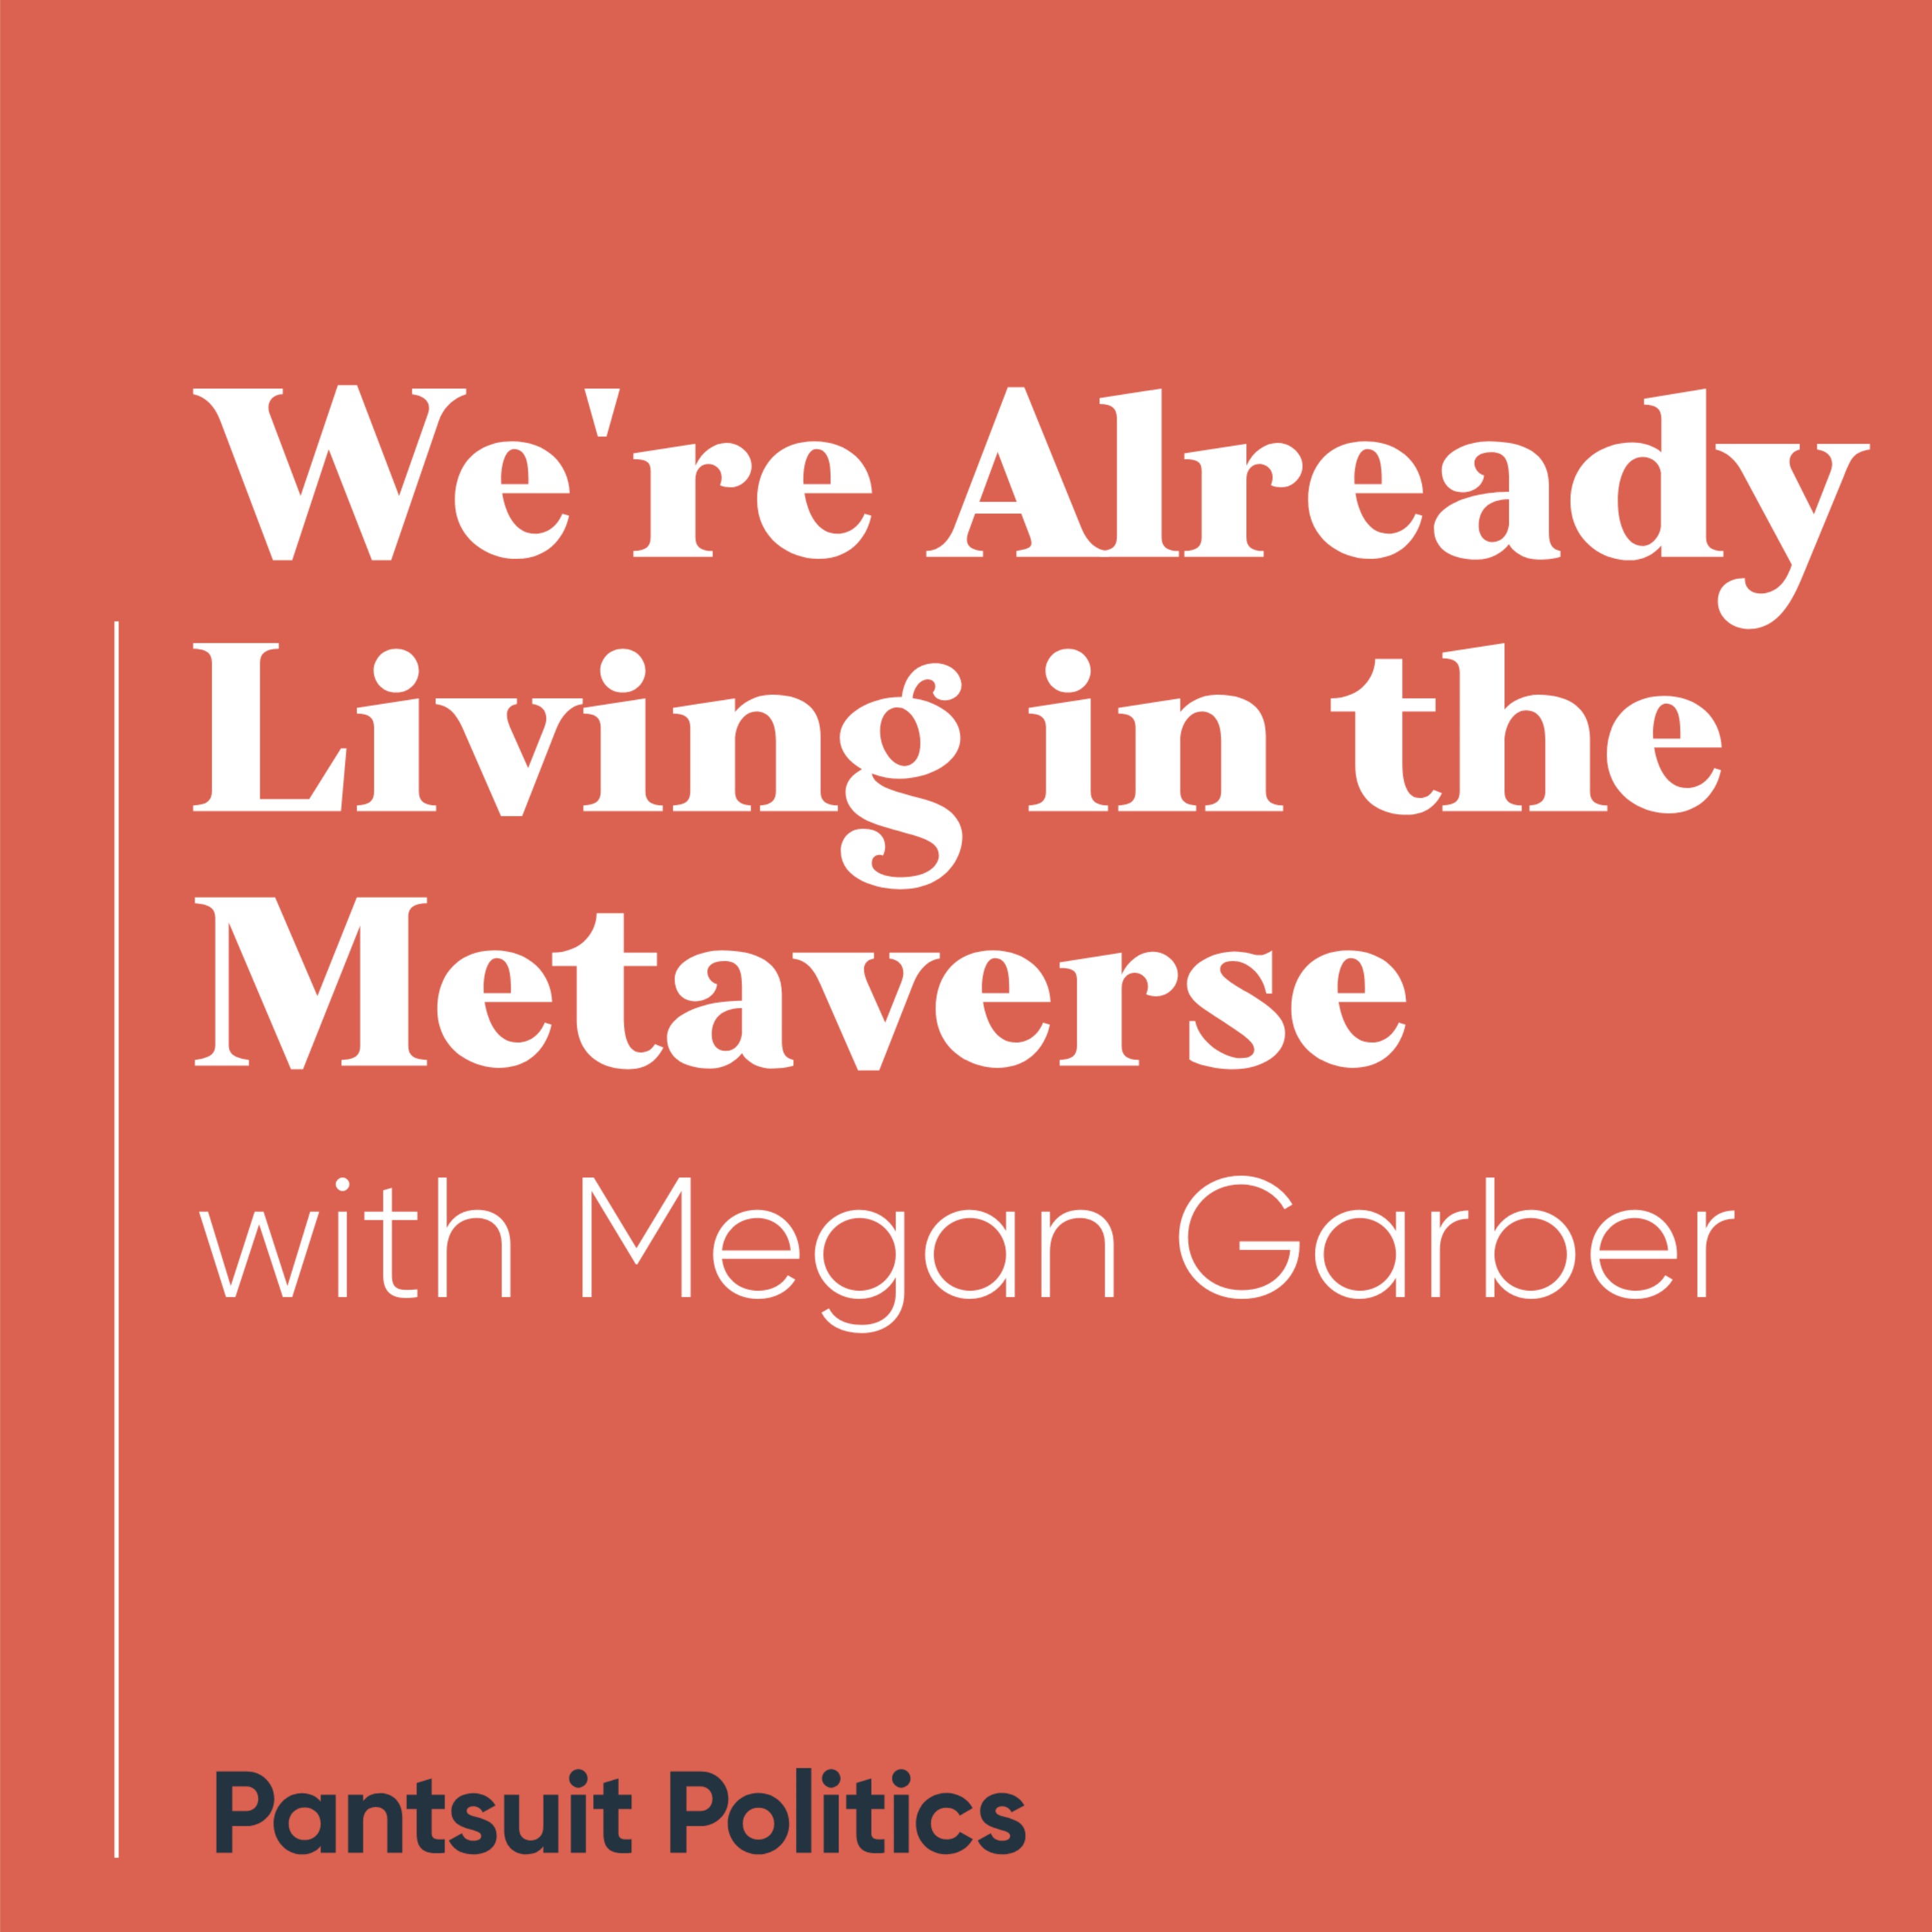 We're Already Living in the Metaverse with Megan Garber